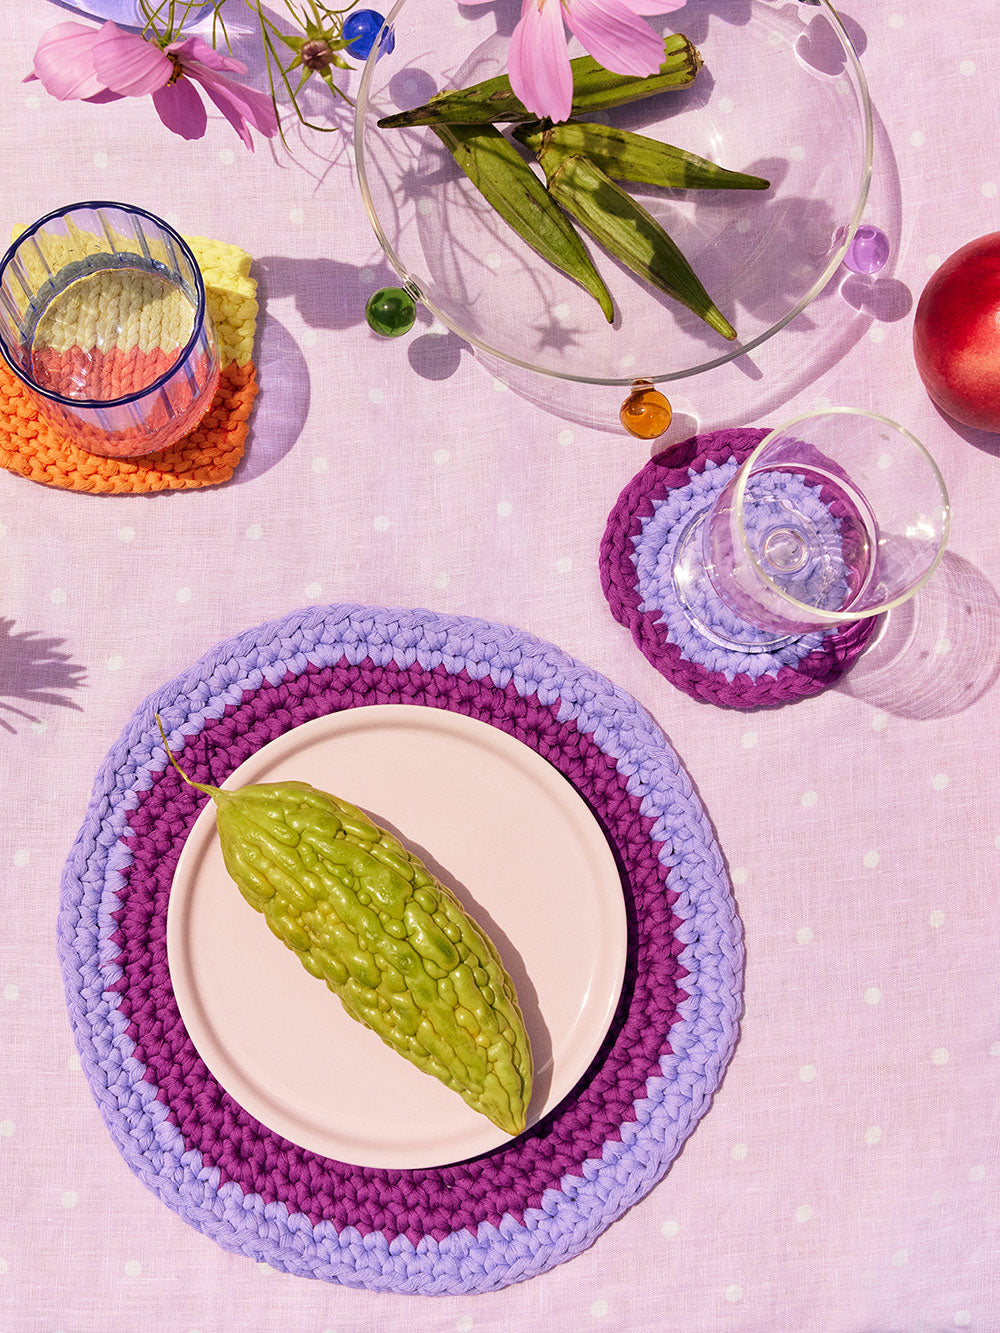 Close up image of the circular plum and lilac Isla crocheted drink coaster and matching placemat.